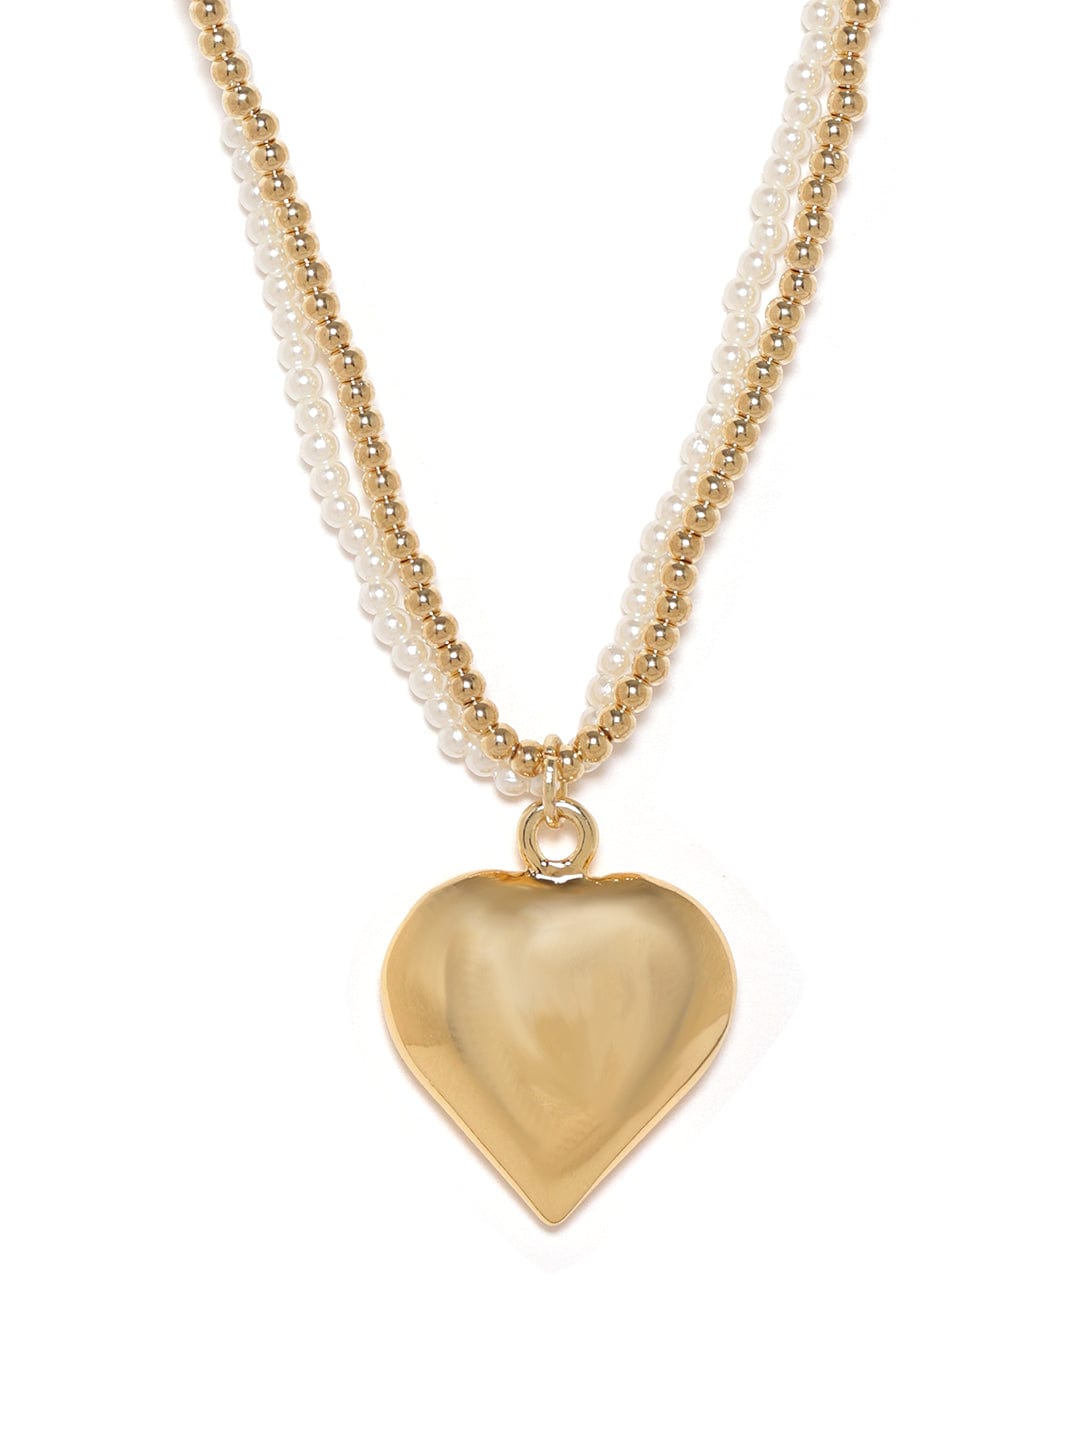 Gold plated pearl beaded Heart pendant layered Necklace Necklaces, Necklace Sets, Chains & Mangalsutra